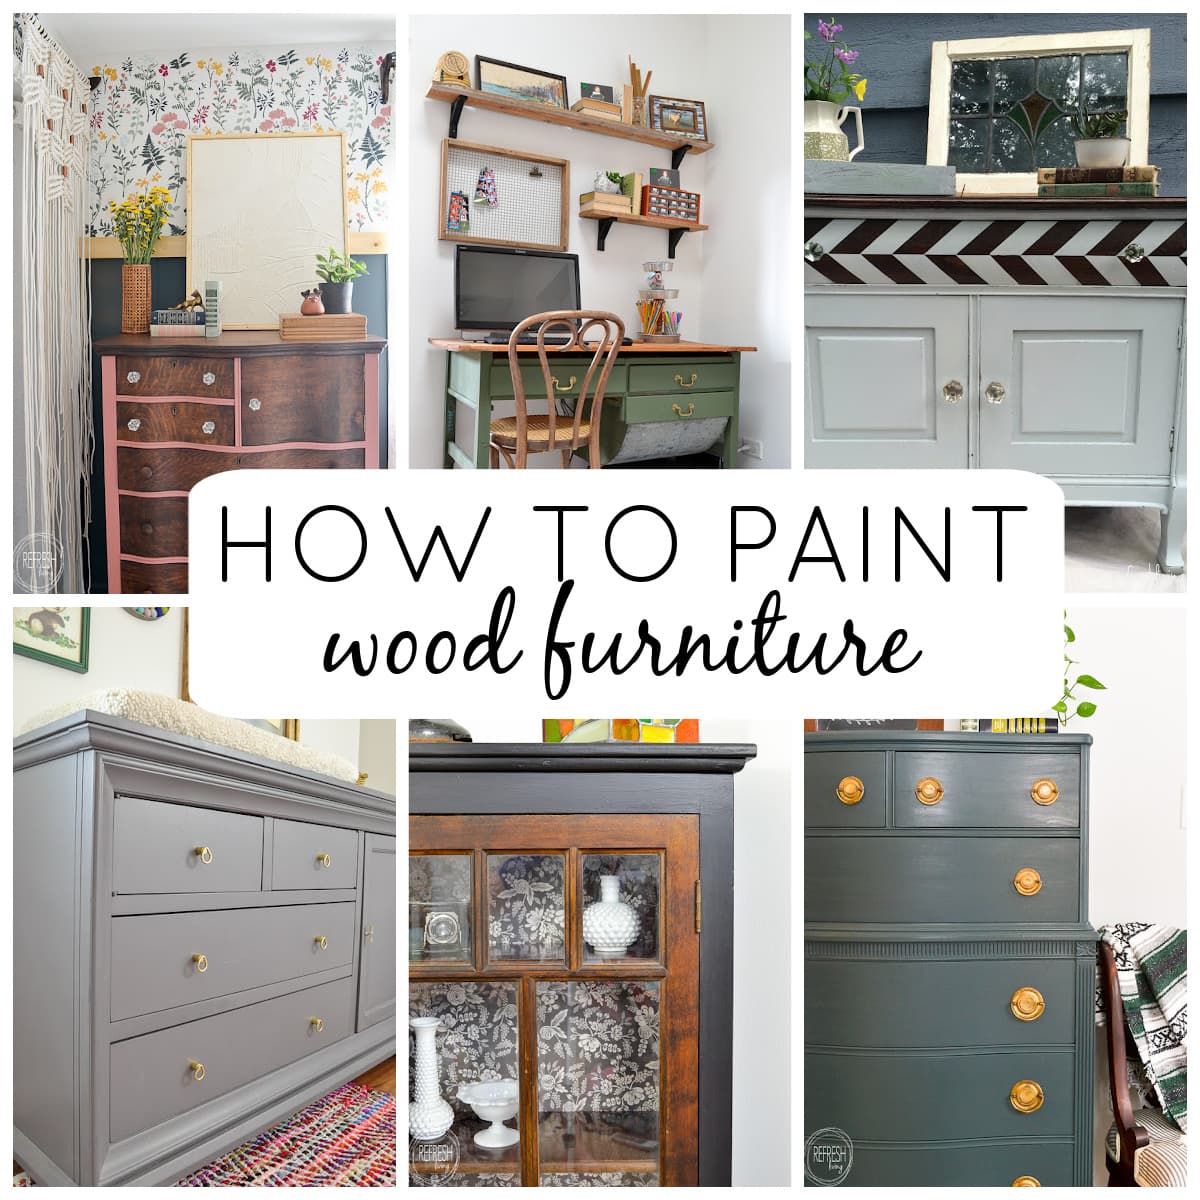 5 Tips for Using Wax on Chalk Paint {Video Series}